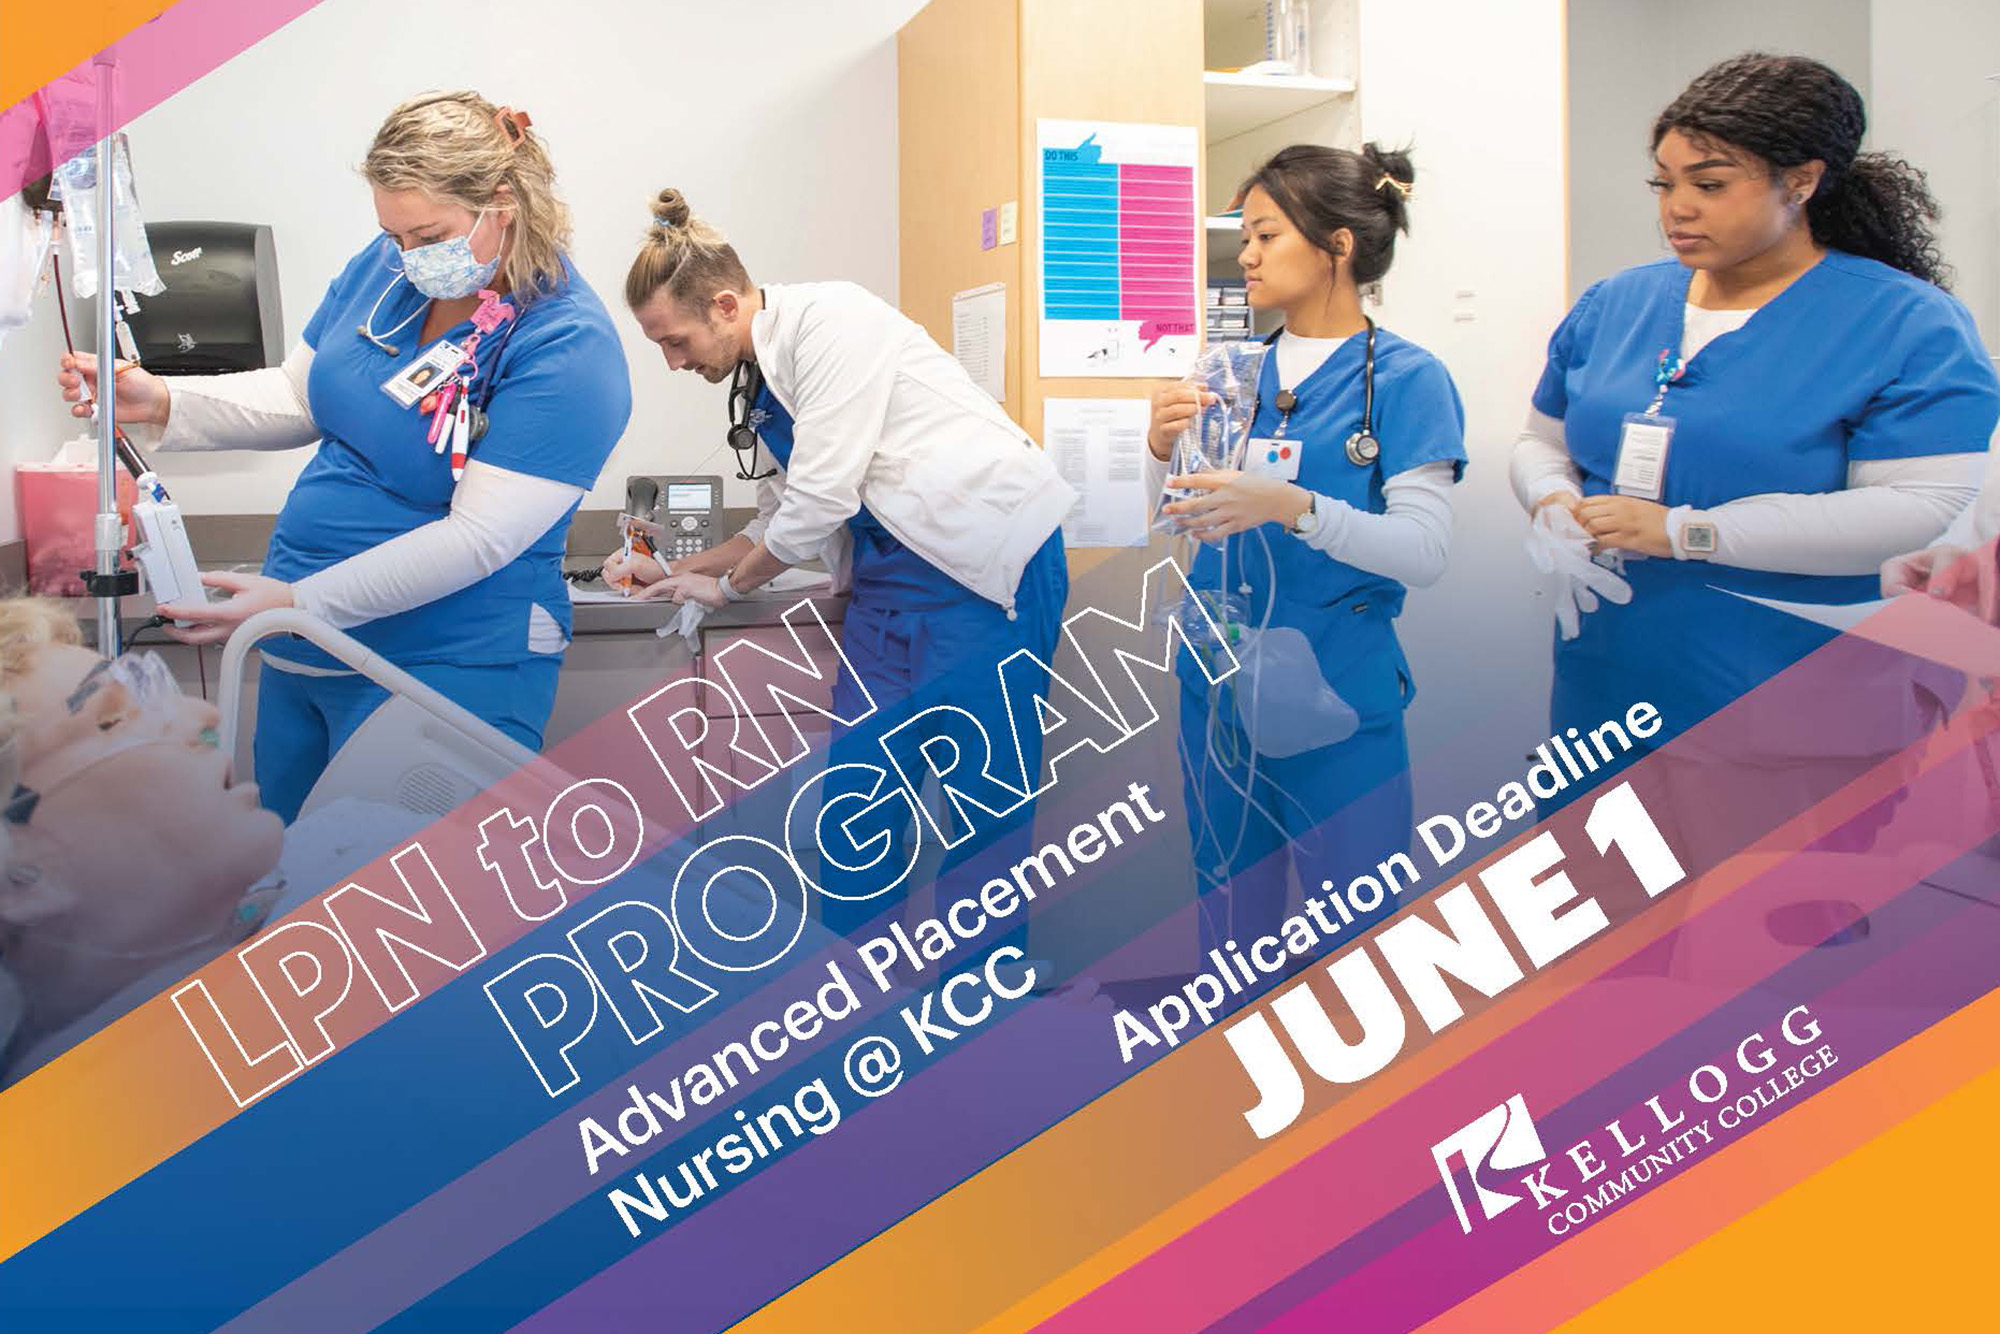 Nursing students train during a simulation exercise on a postcard graphic that reads, "LPN to RN Program. Advanced Placement at KCC. Application deadline June 1."